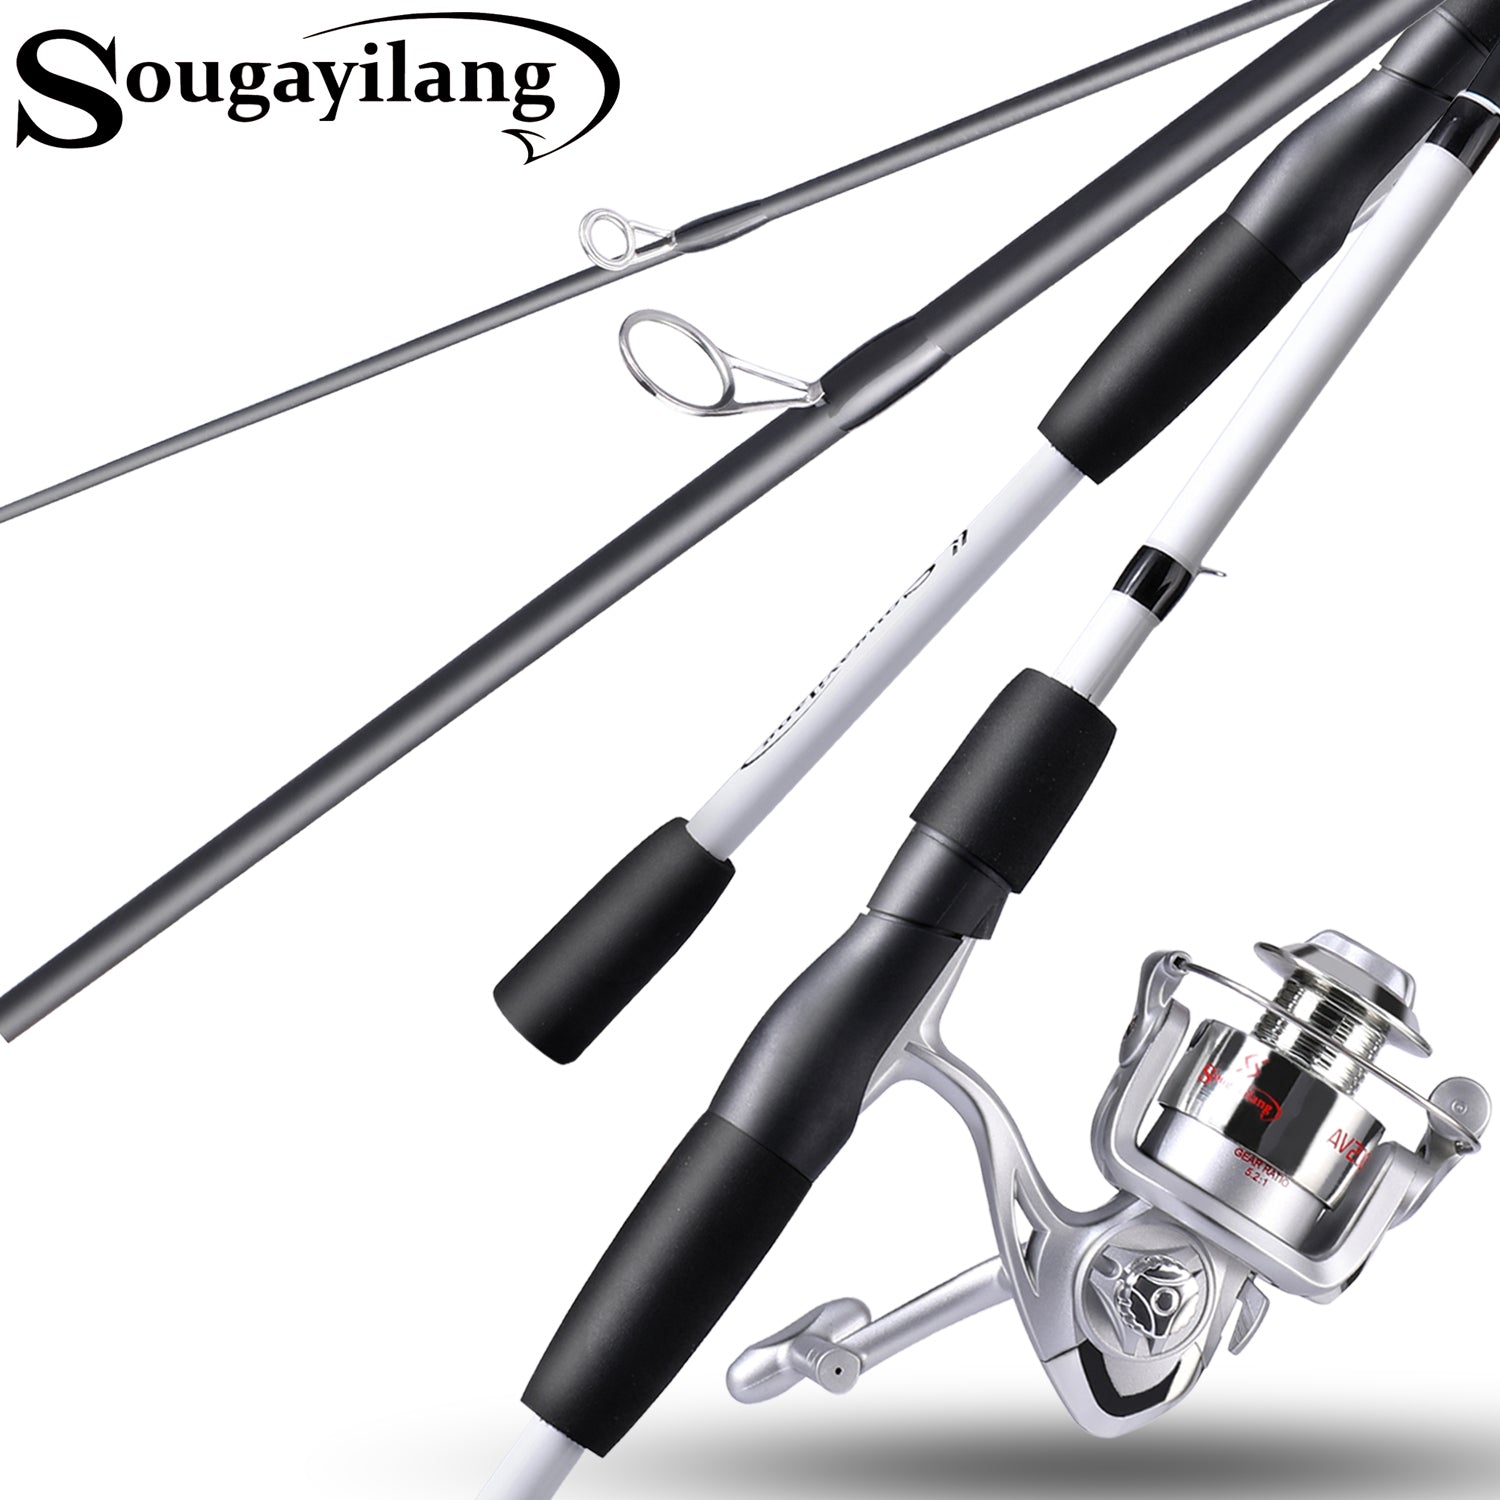 Sougayilang Fishing Rod and Reel Set Carbon Fiber Casting Rod and 5.2:1  Spinning Reel Max Drag 8kg for Freshwater Carp Fishing